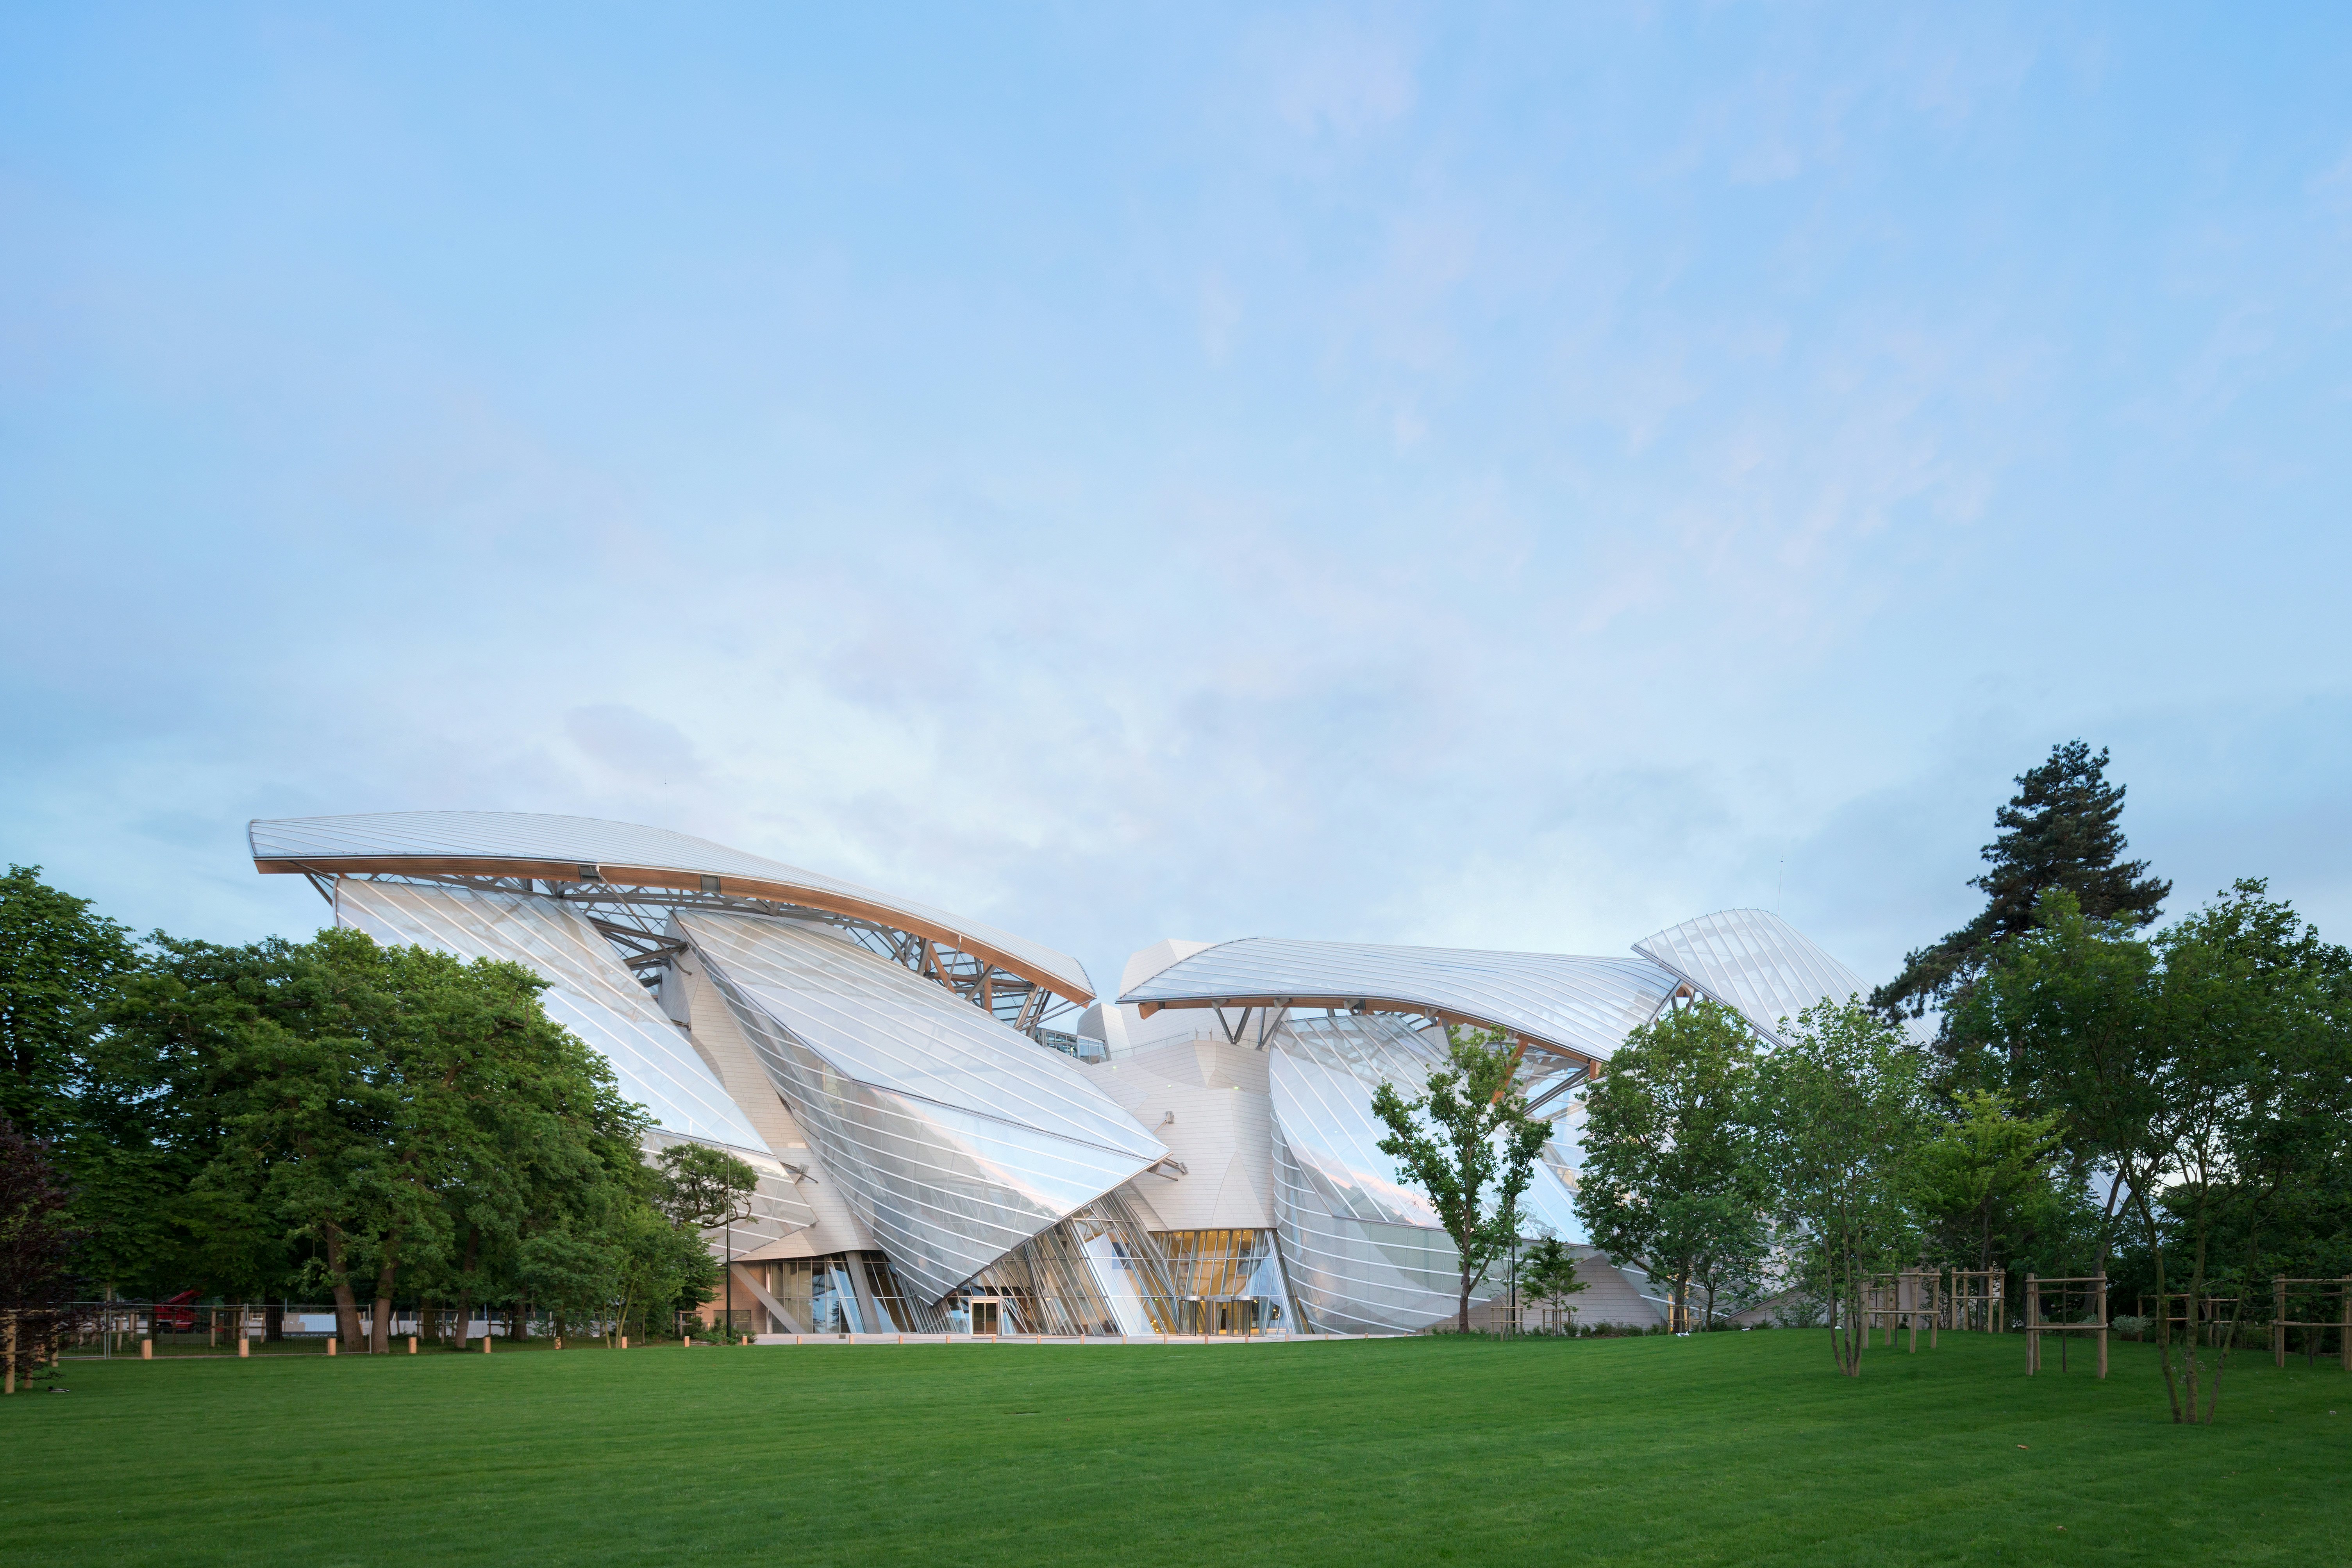 Tickets Louis Vuitton Foundation - Buy tickets for the Louis